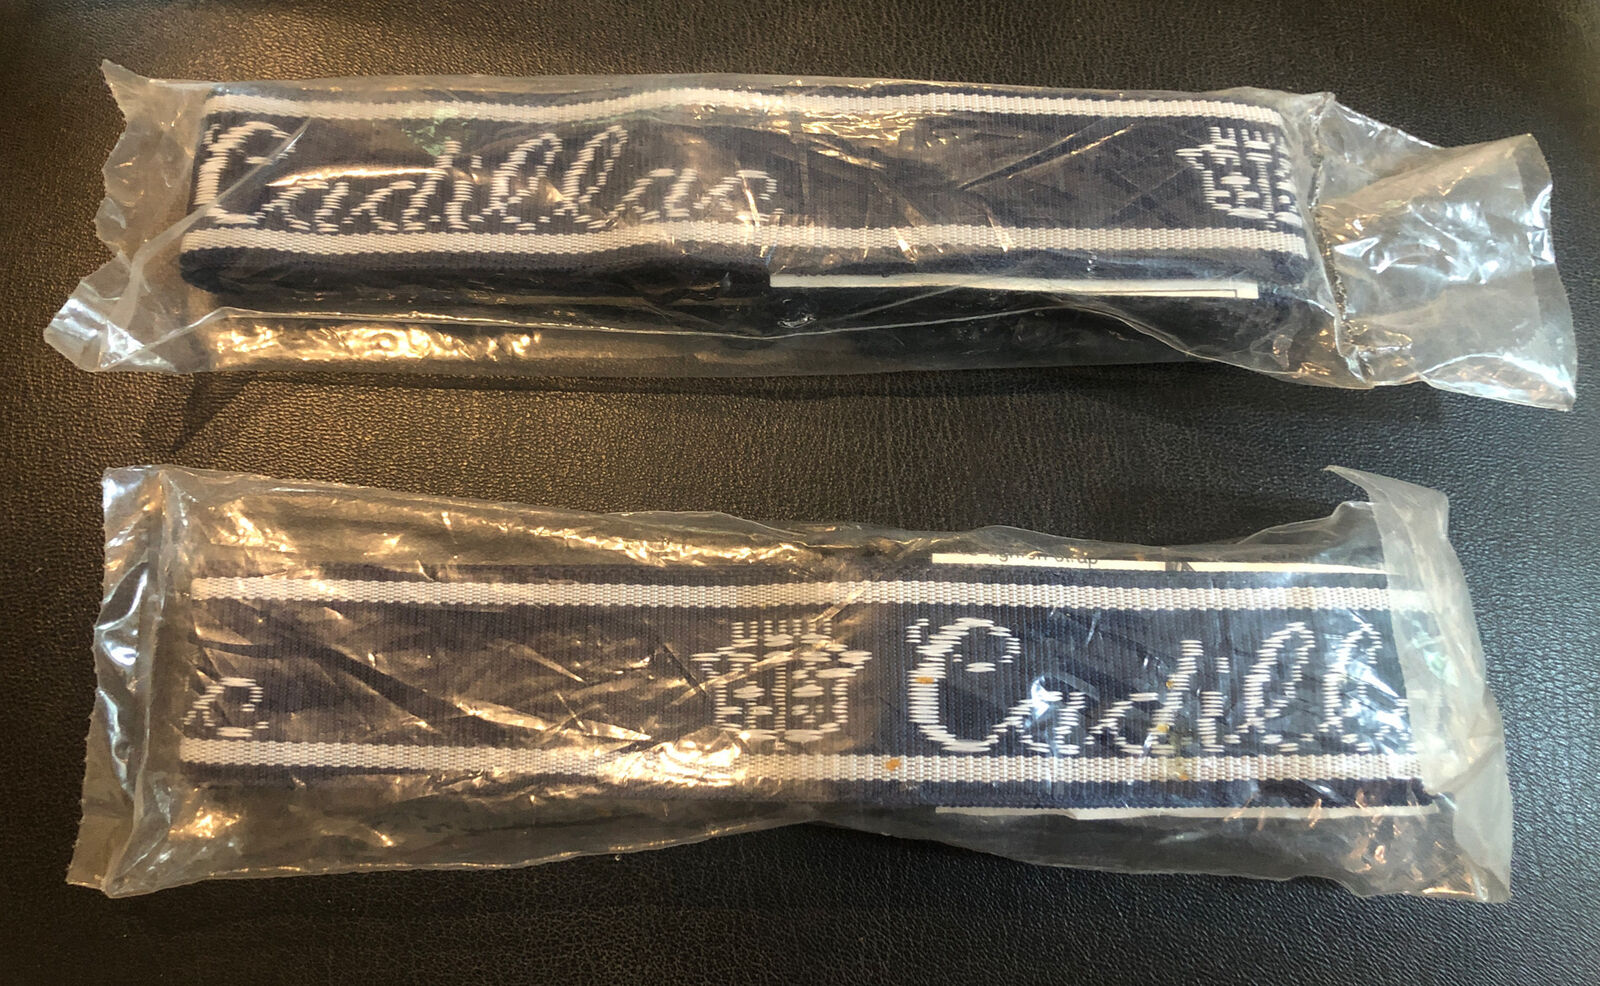 2- Cadillac Luggage Straps Fits Bags Up To 72" Woven In Logo Made In The Usa